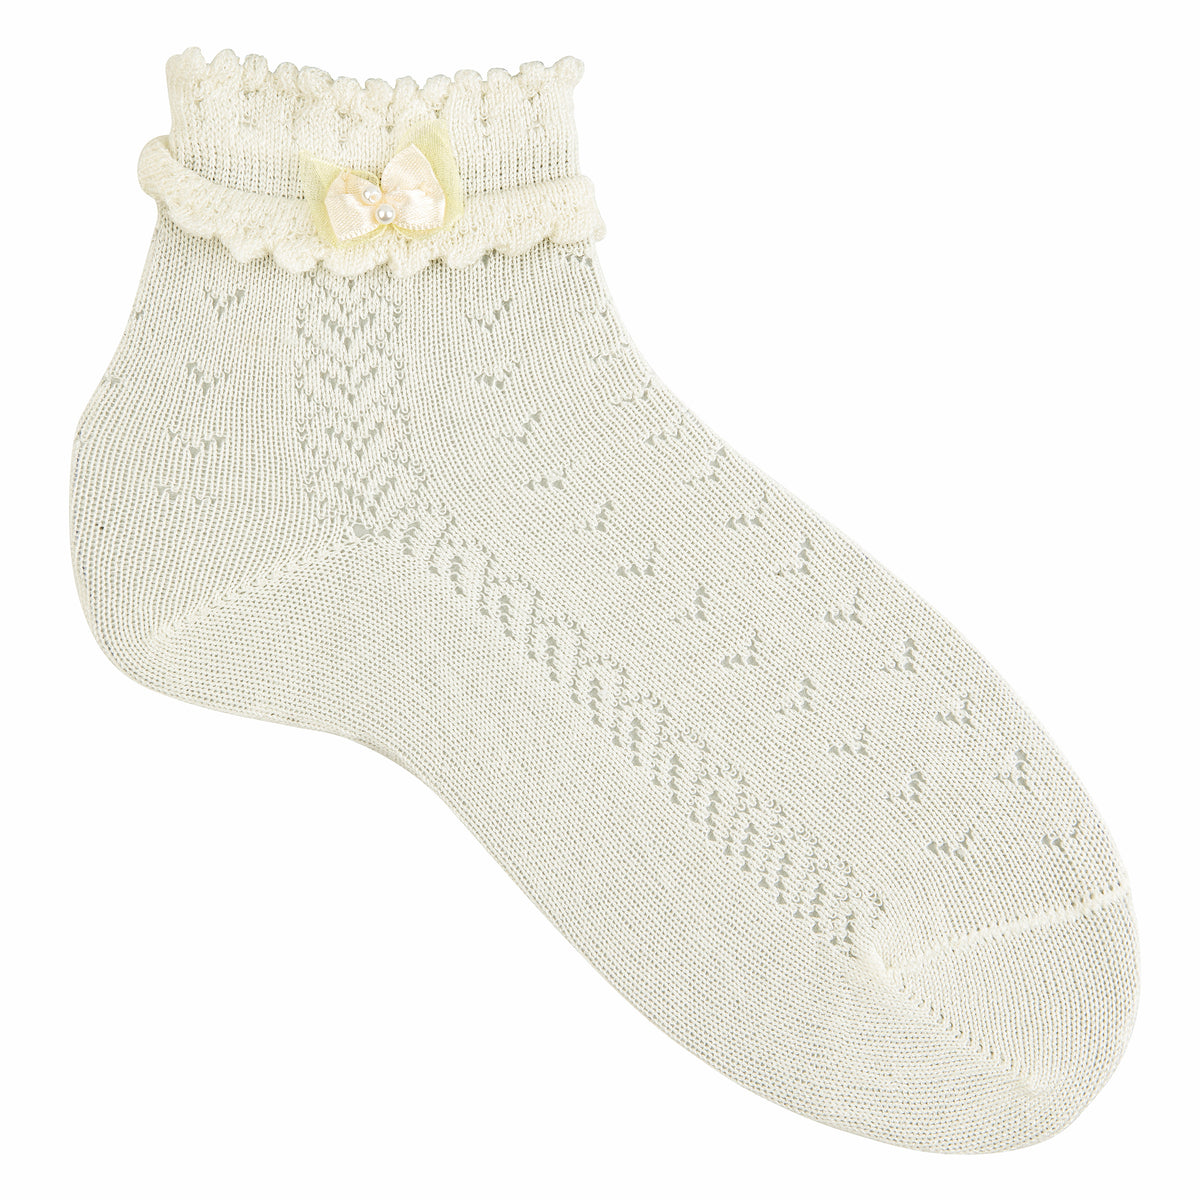 Ceremonial ankle socks with bow & pearl detail